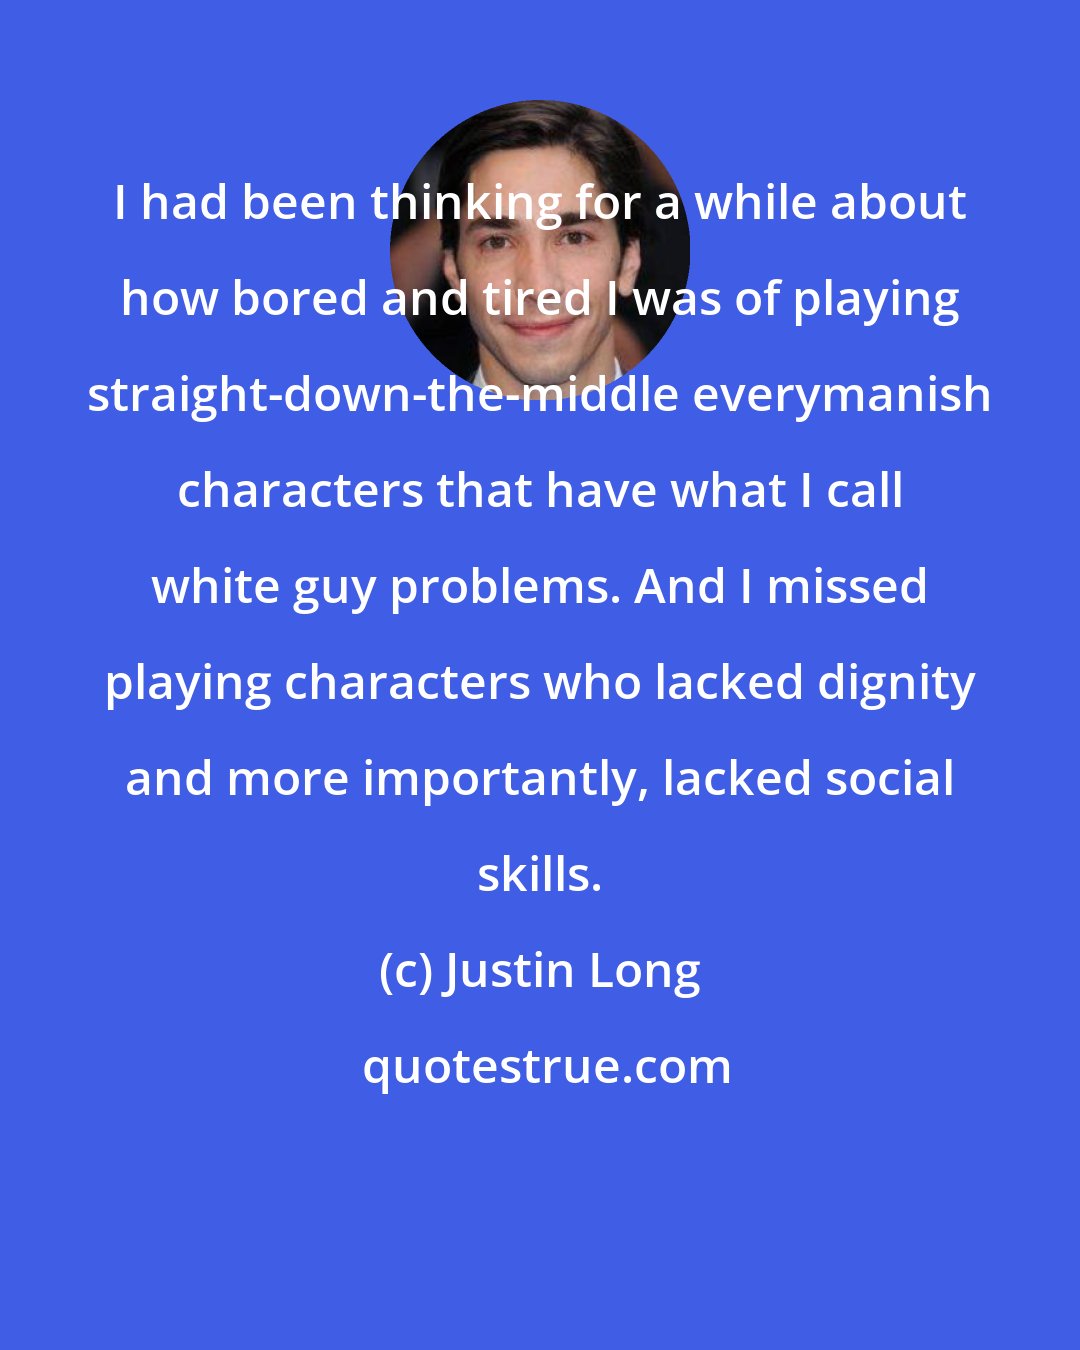 Justin Long: I had been thinking for a while about how bored and tired I was of playing straight-down-the-middle everymanish characters that have what I call white guy problems. And I missed playing characters who lacked dignity and more importantly, lacked social skills.